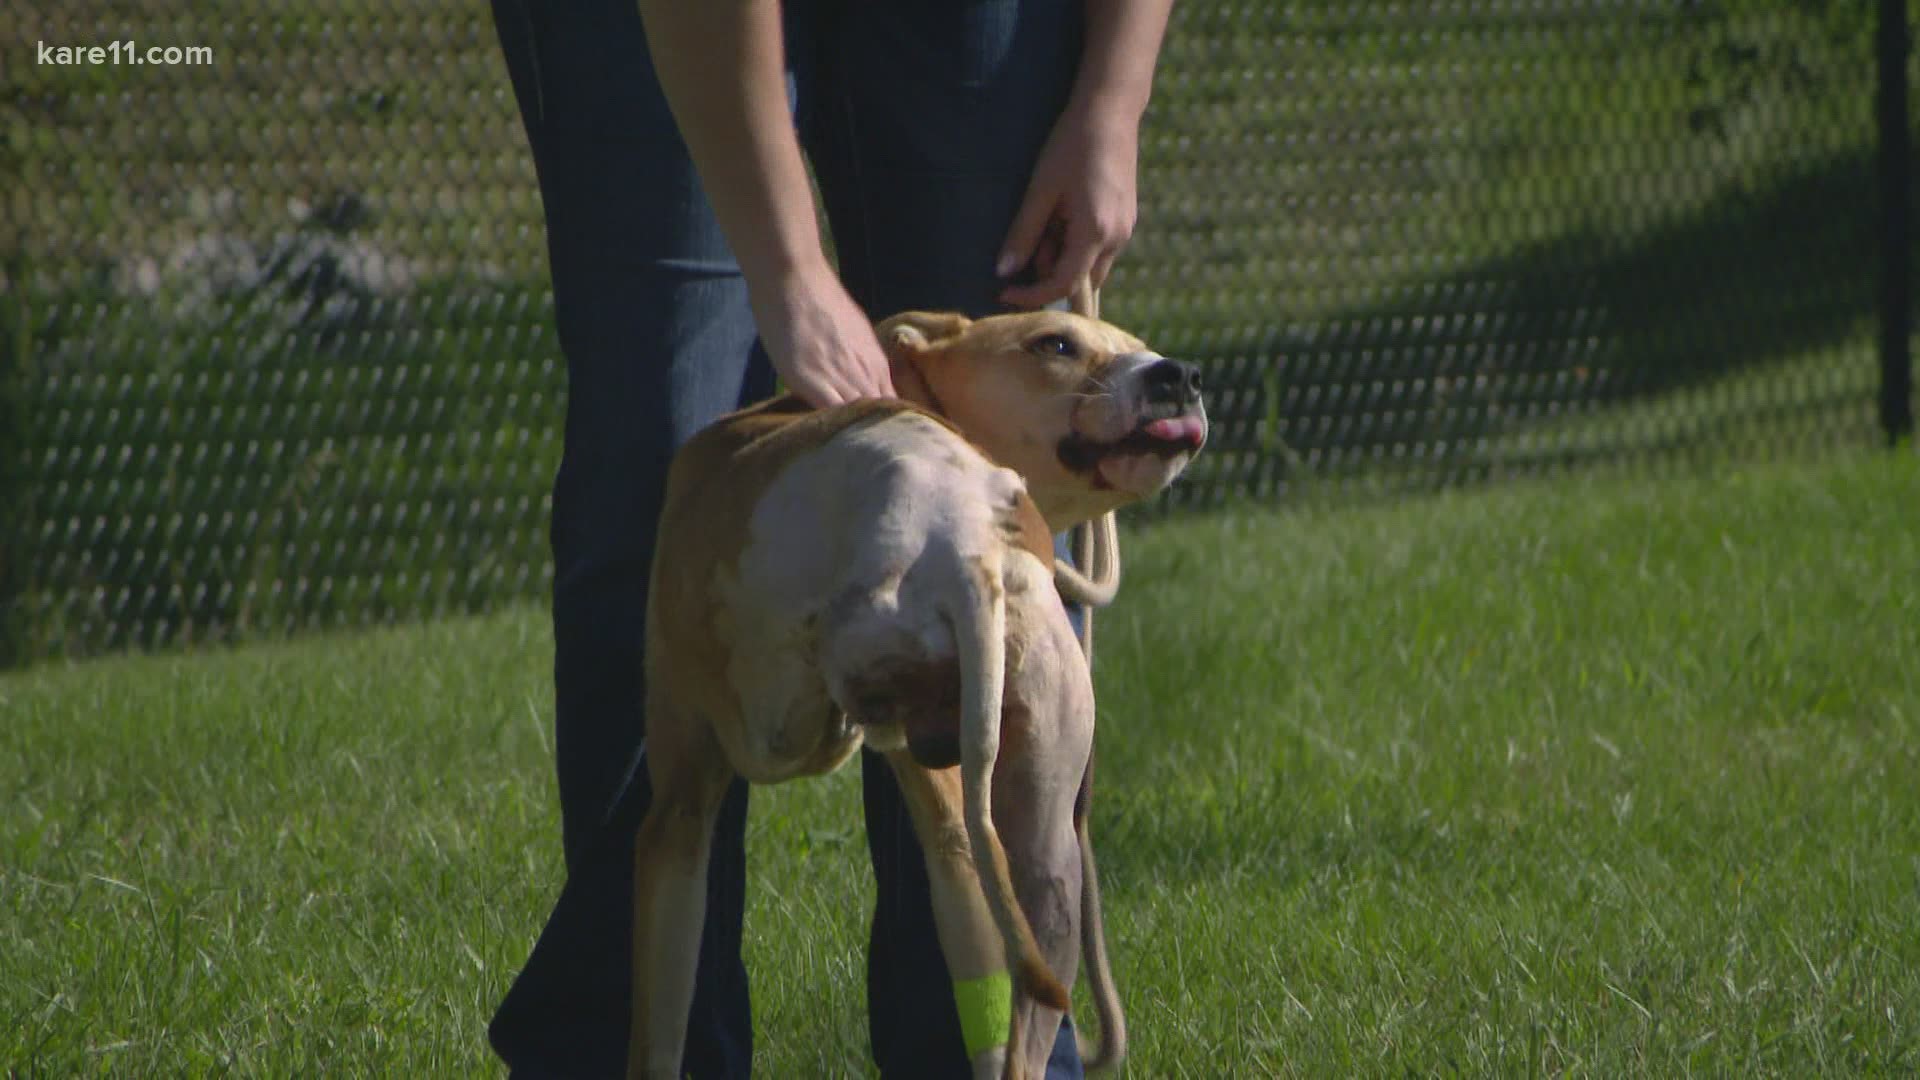 St. Paul animal control is investigating. The Humane Society of the United States is offering a $5,000 reward to anyone with info that might lead to an arrest.